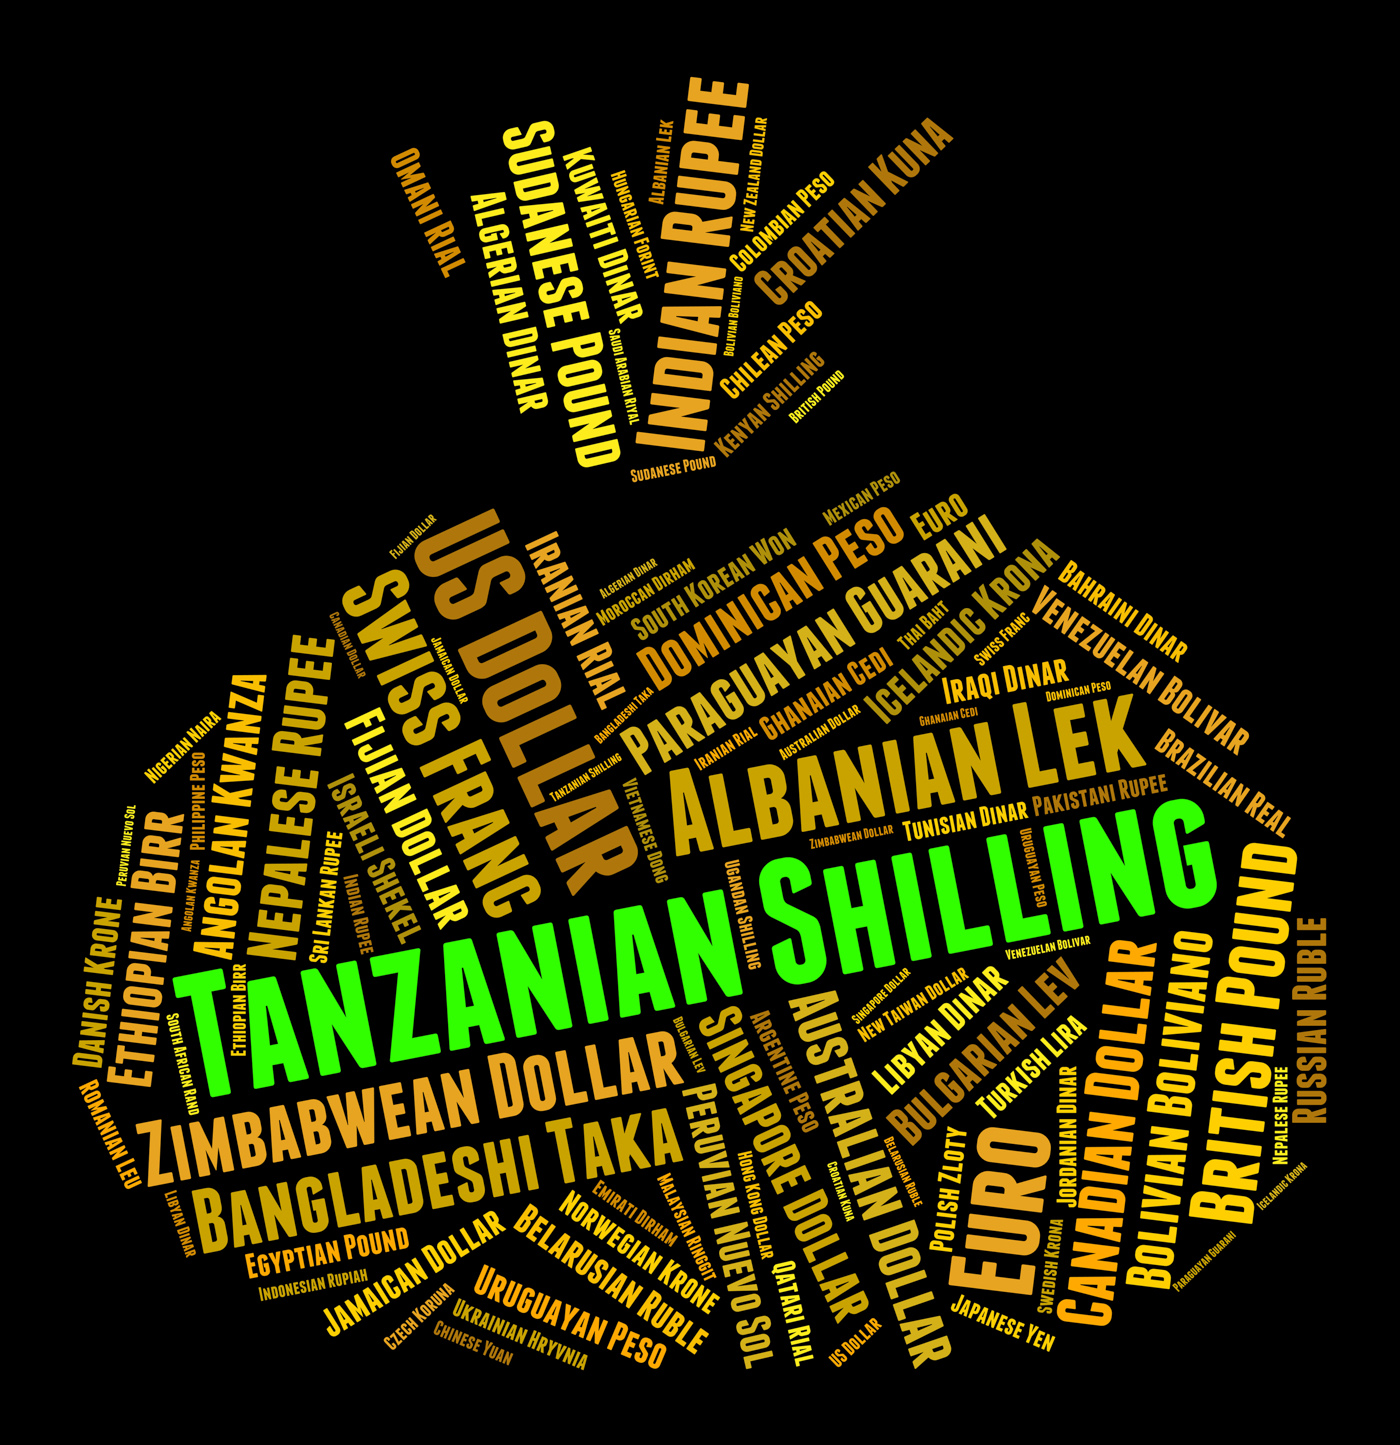 Tanzanian Shilling Indicates Foreign Currency And Currencies, Banknote, Fx, Words, Wordcloud, HQ Photo